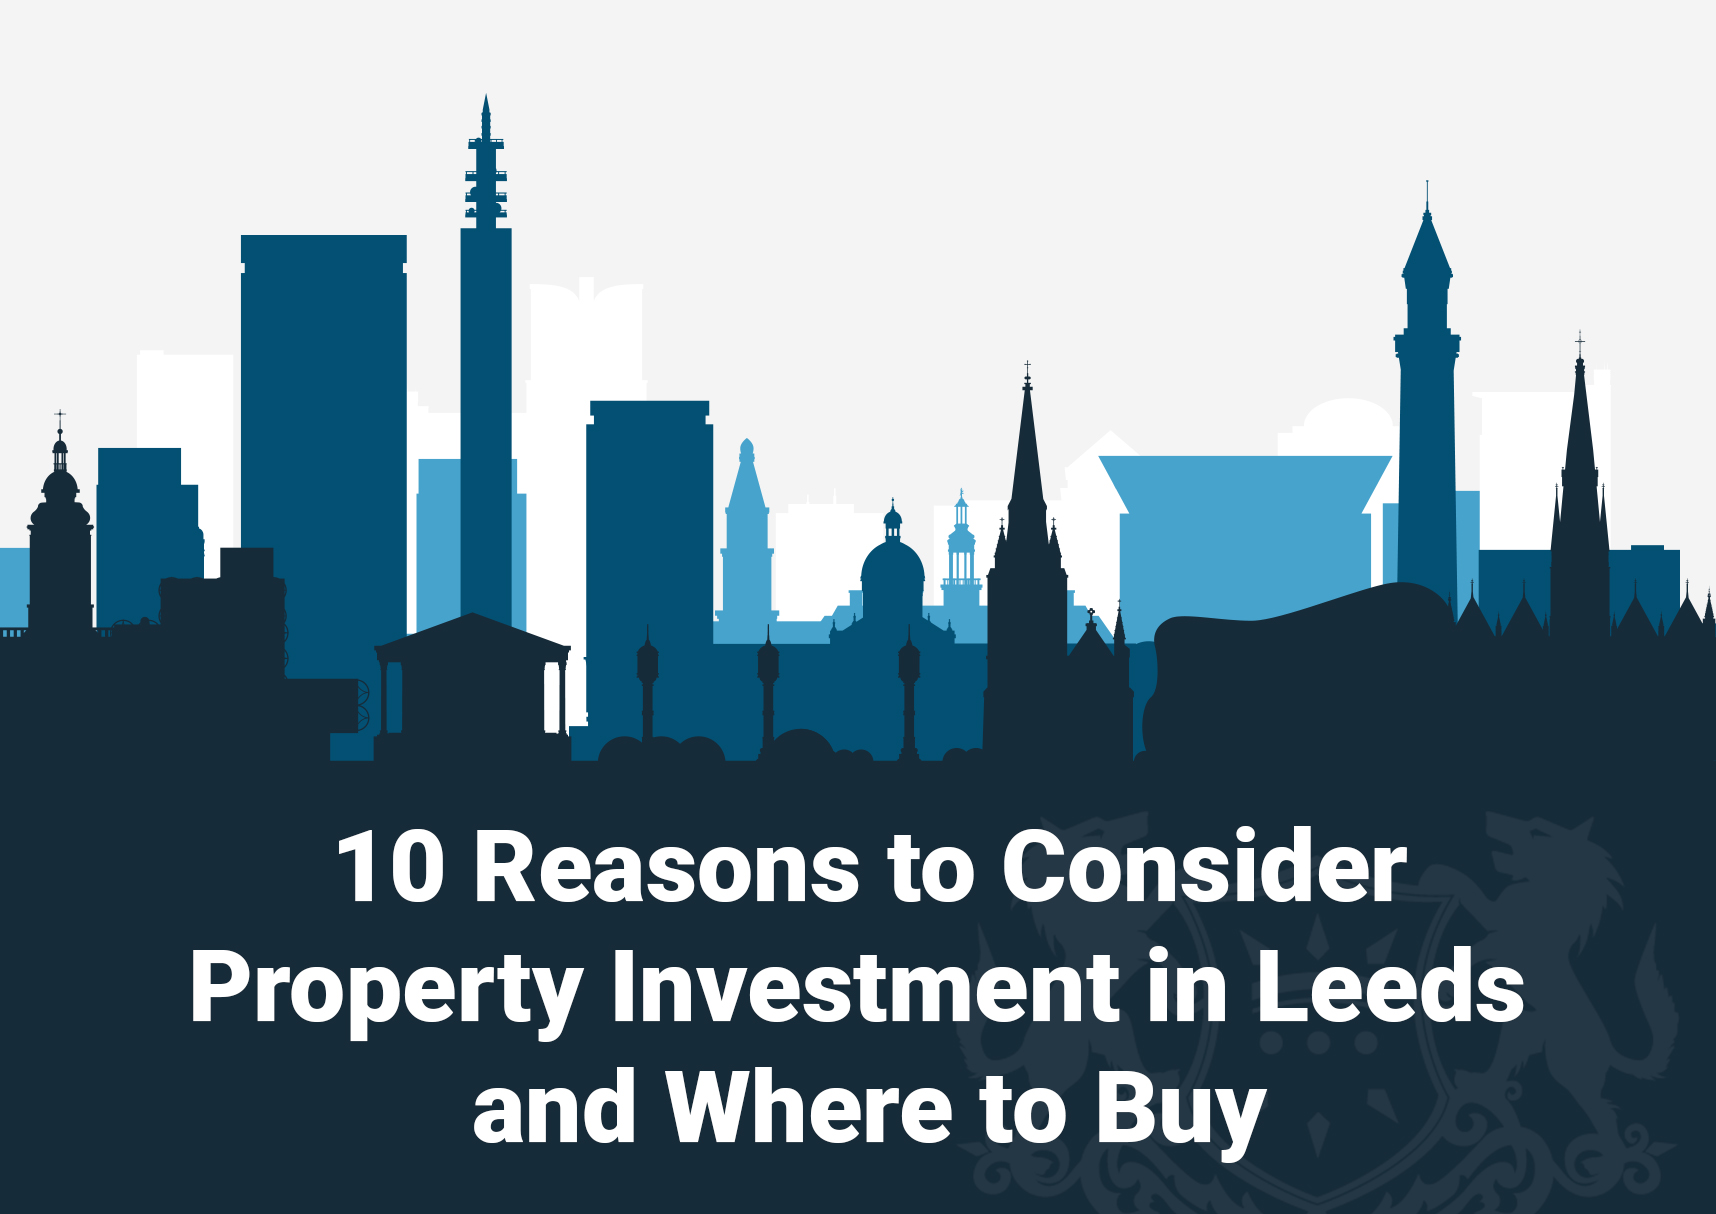 10 Reasons to Consider Property Investment in Leeds and Where to Buy